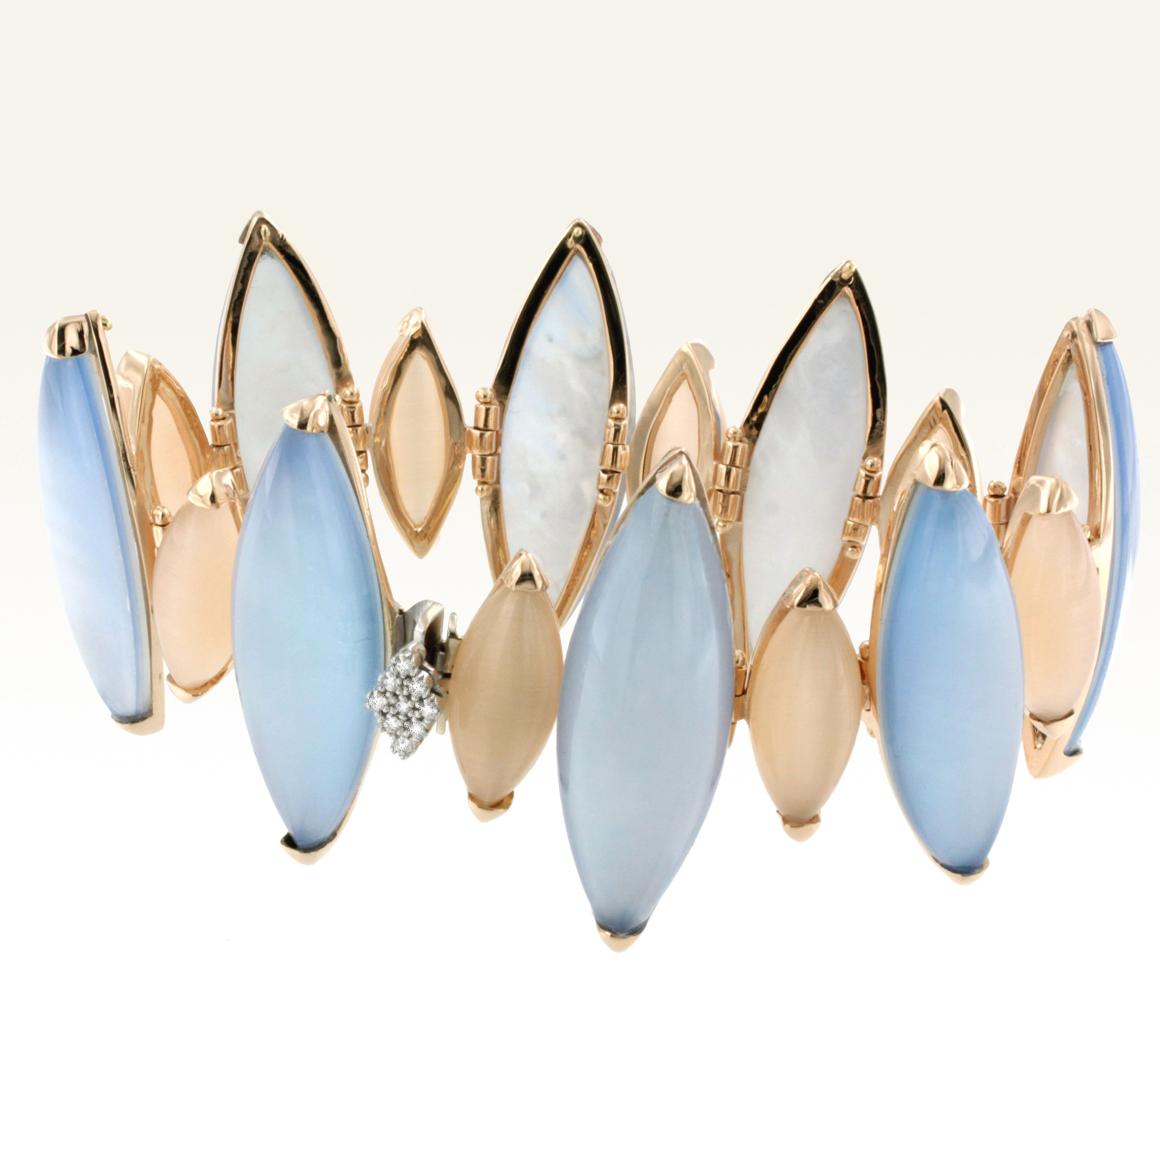 Modern Bracelet in 18K rose Gold with Double stones (mother of pearl and blue topaz) cabochon marquise cut (size: 12 X 35 mm), moonstone cabochon marquise cut (size: 8 X 18 mm) and white  Diamond karat 0.09 VS colour G/H. 
Designed and handmade in